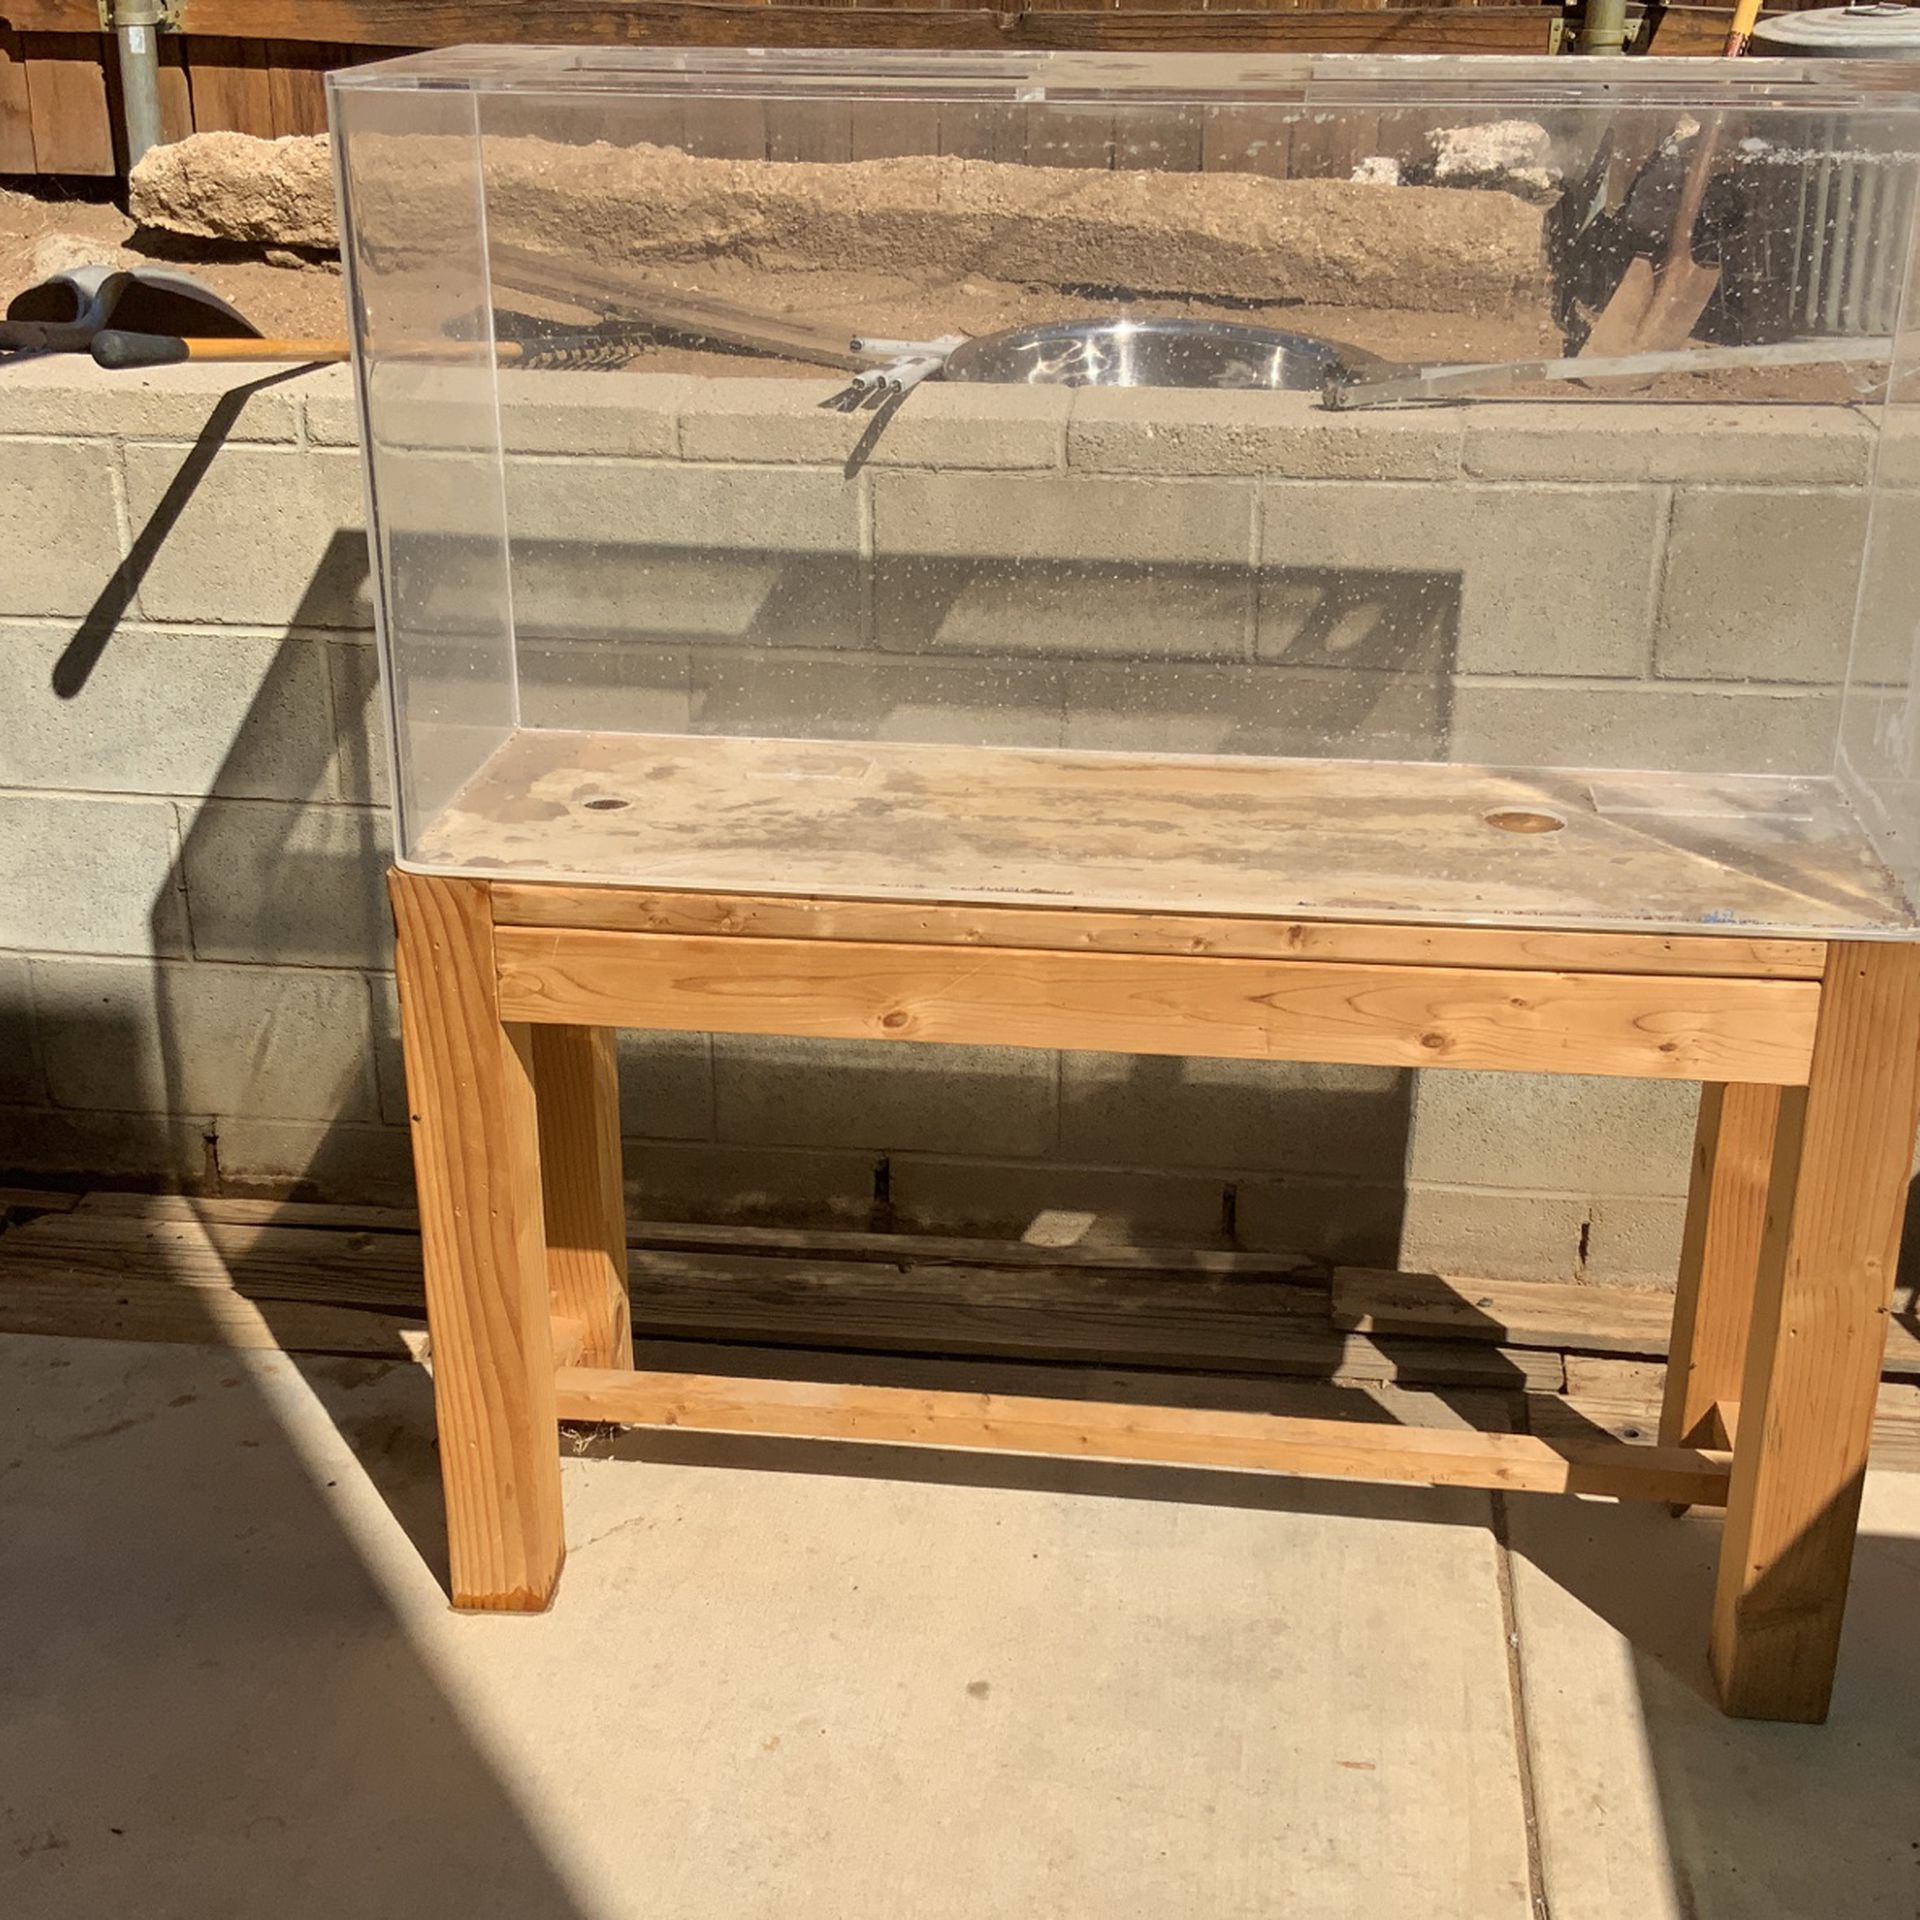 60 gallon fish tank with stand